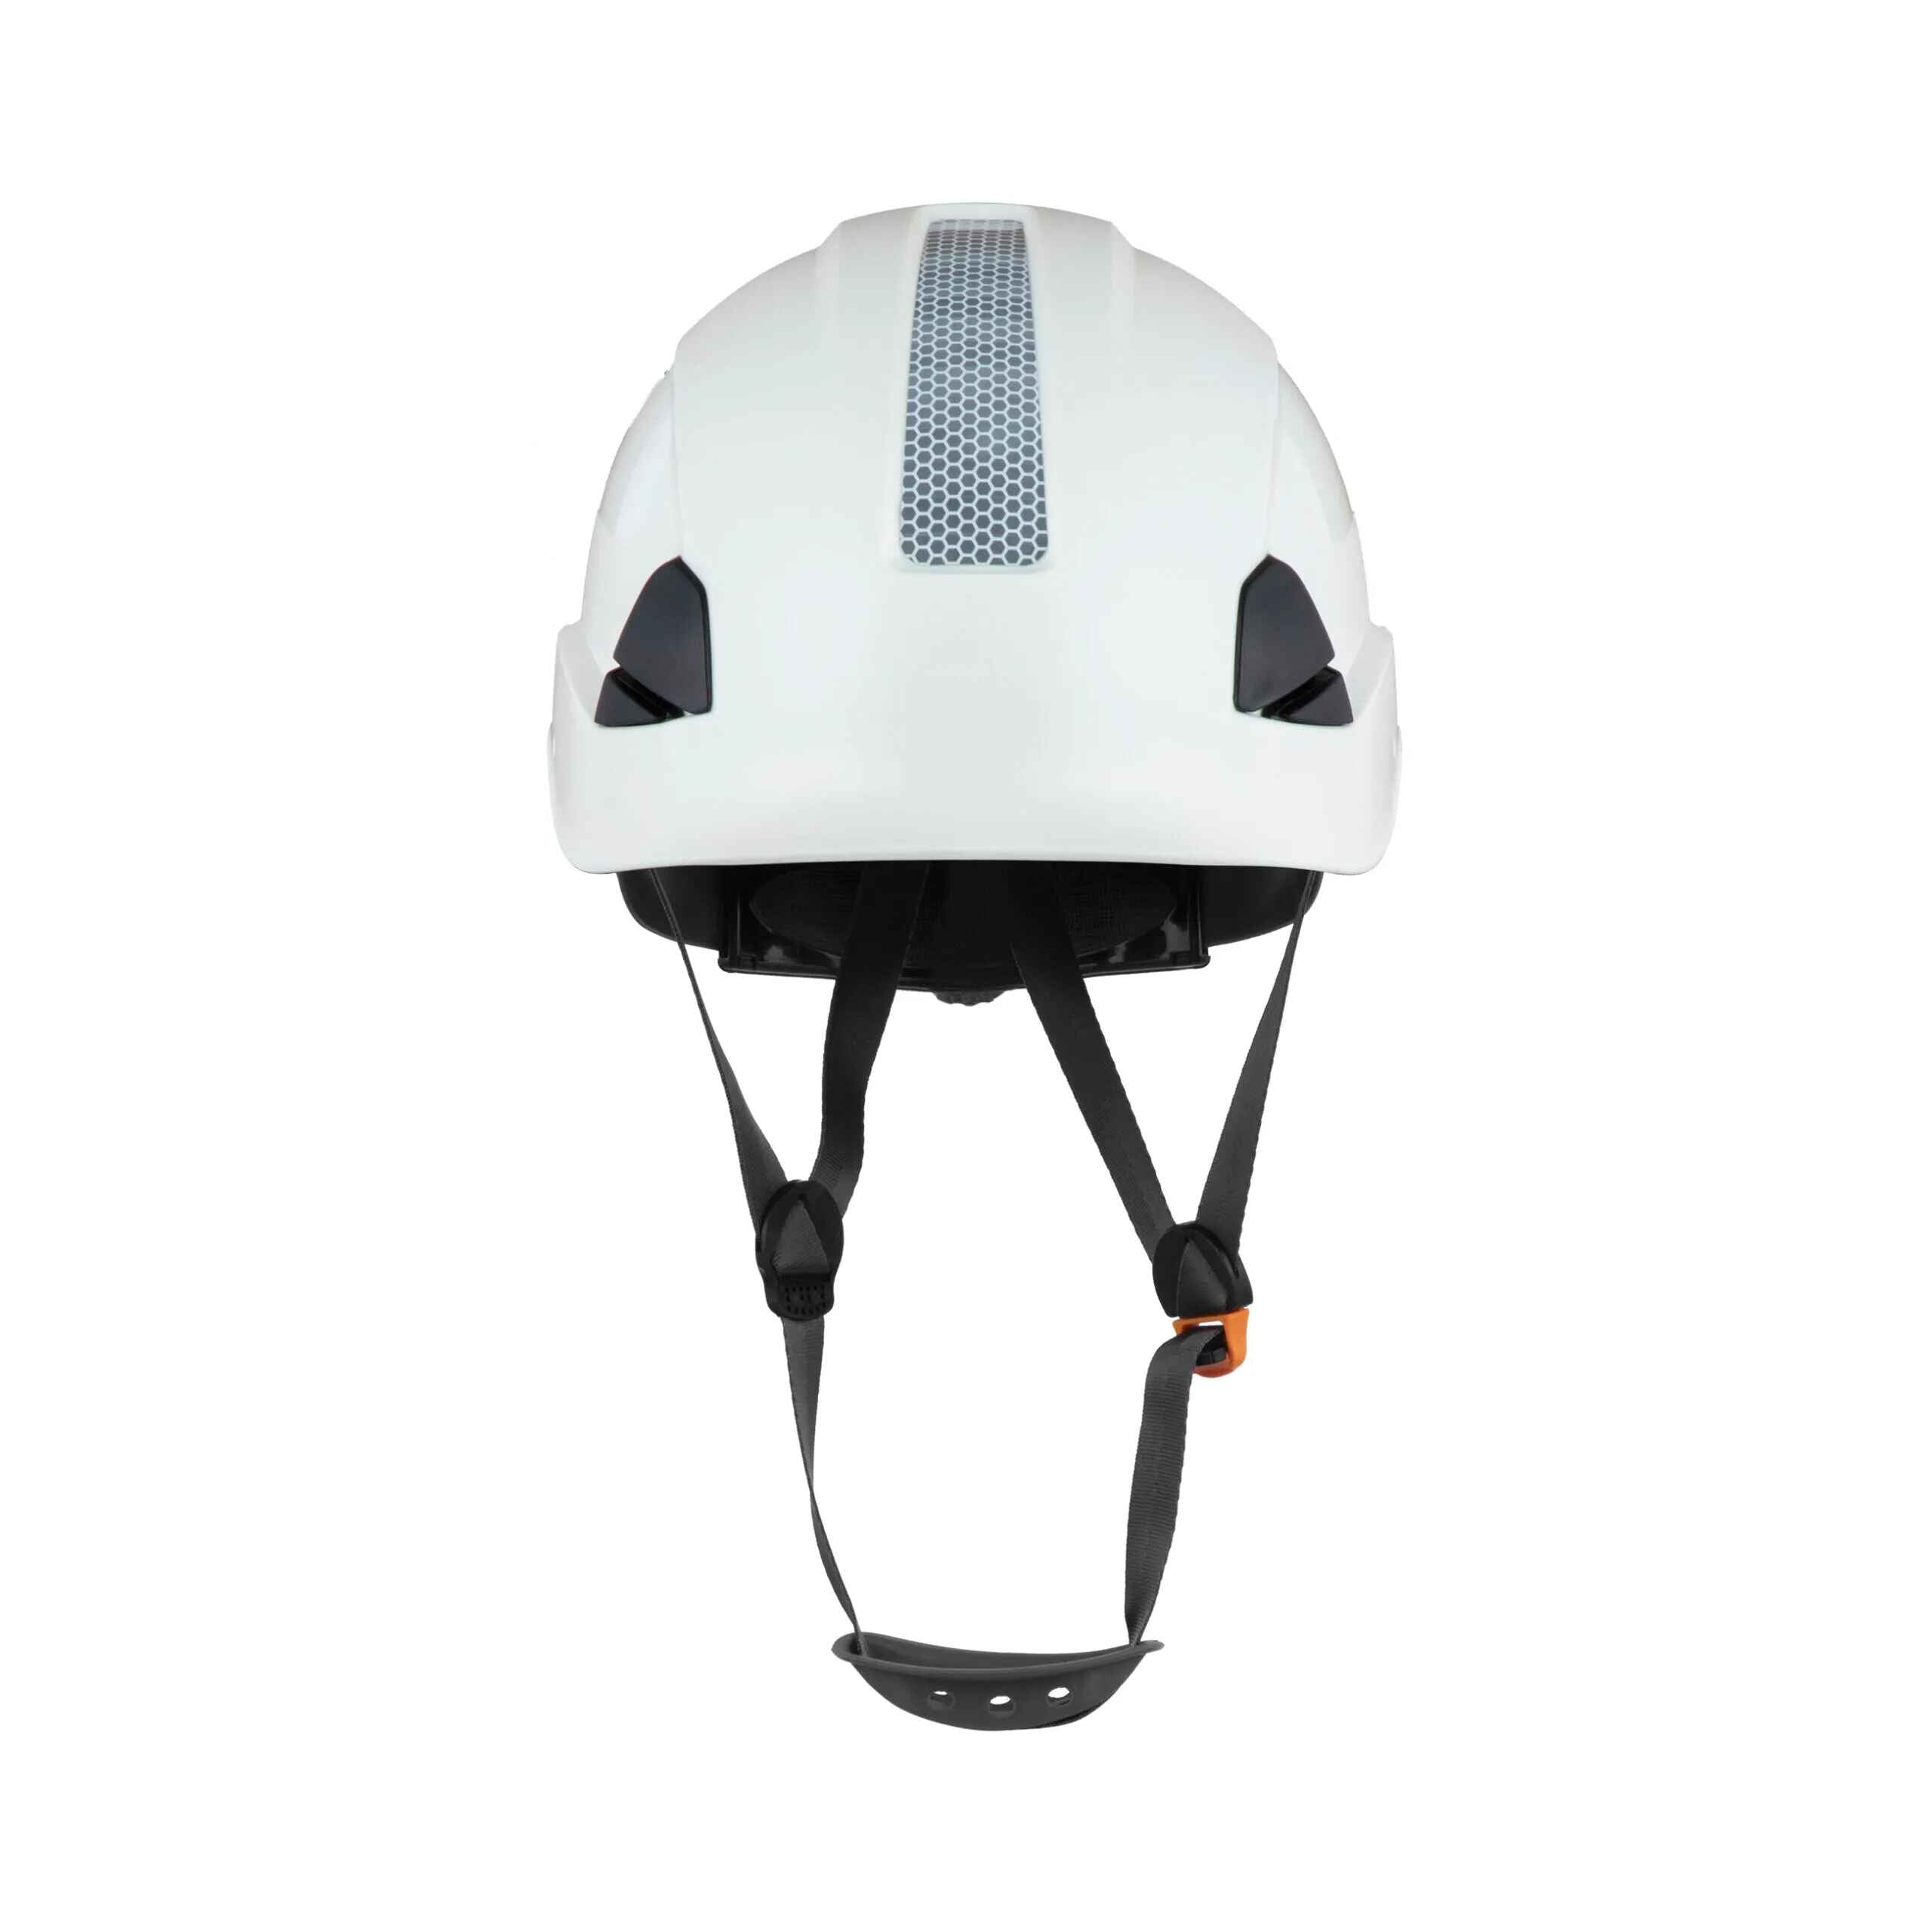 H1-EH, Electrical Shock Protection, Safety Helmet Type 1, Class E, ANSI Z89 & EN 397 Rated - Defender Safety